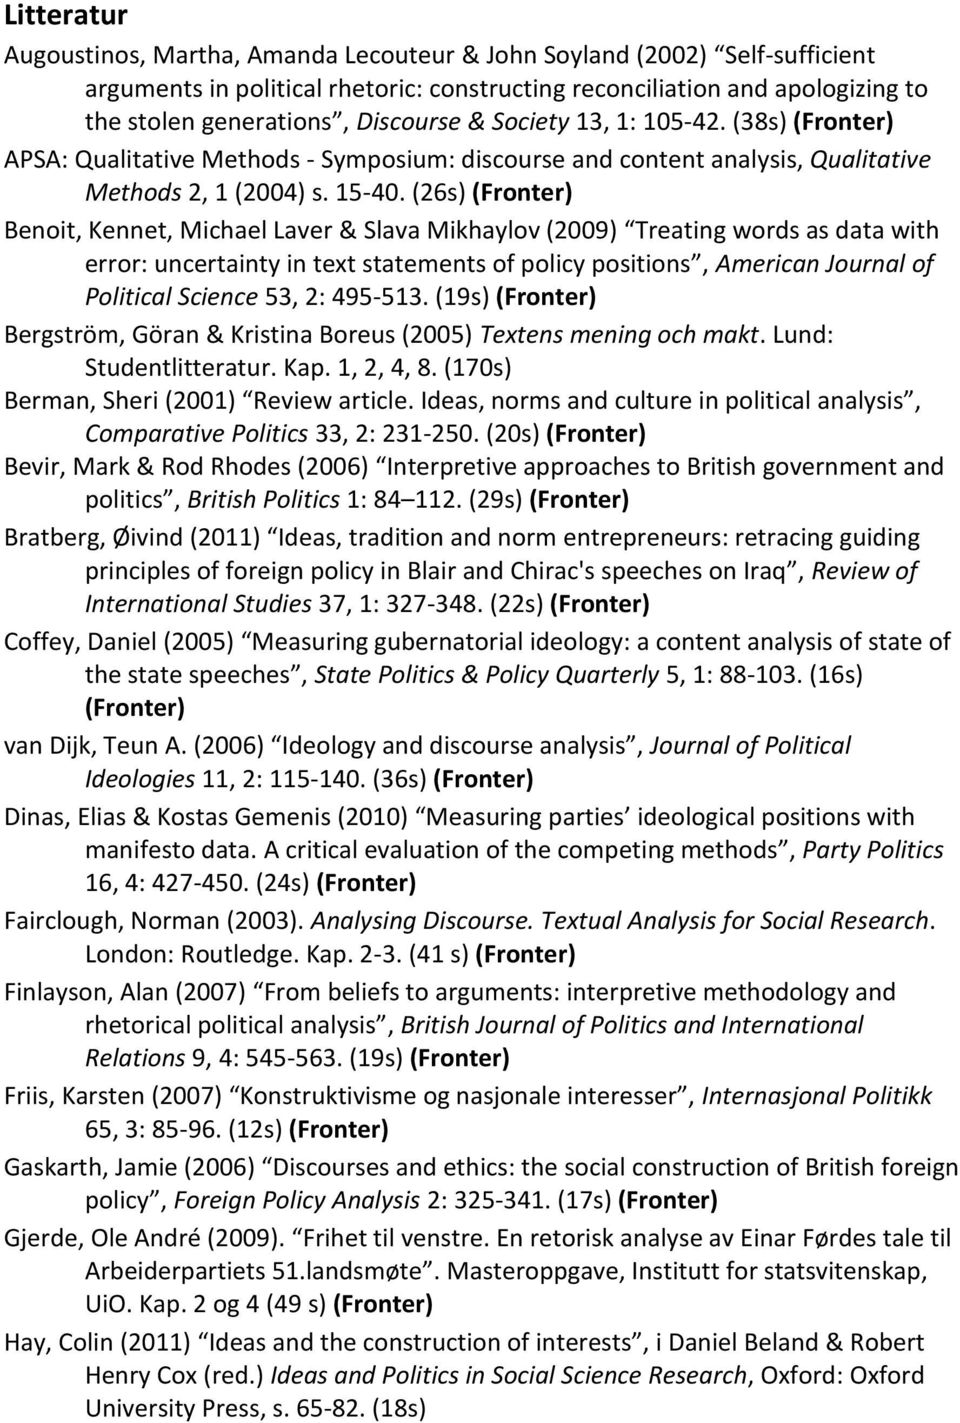 (26s) Benoit, Kennet, Michael Laver & Slava Mikhaylov (2009) Treating words as data with error: uncertainty in text statements of policy positions, American Journal of Political Science 53, 2: